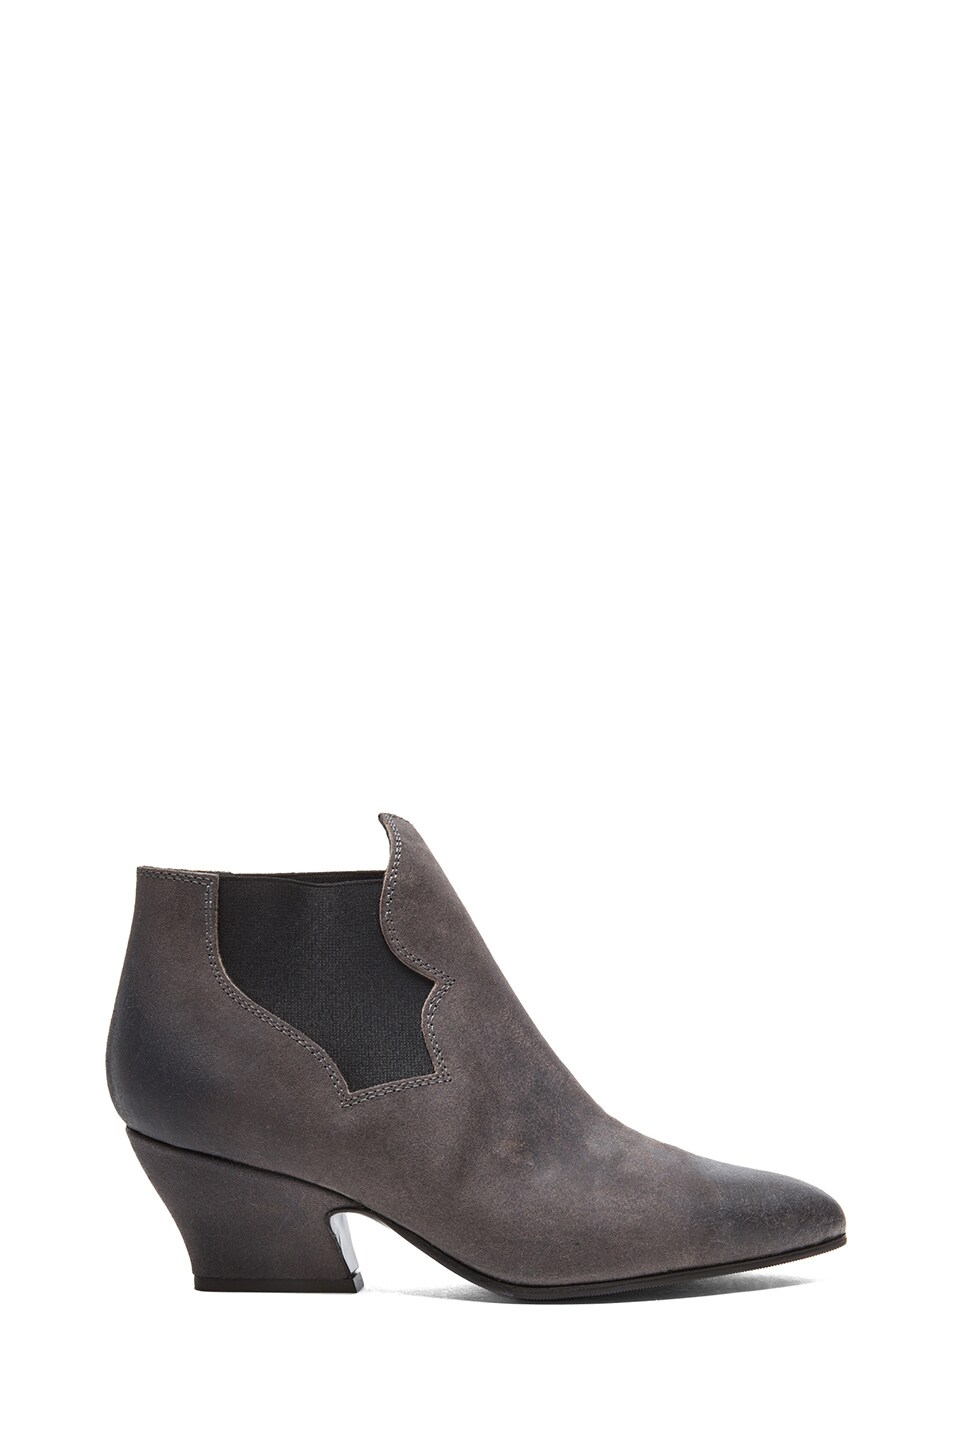 Image 1 of Acne Studios Alma Antique Suede Booties in Anthracite Grey